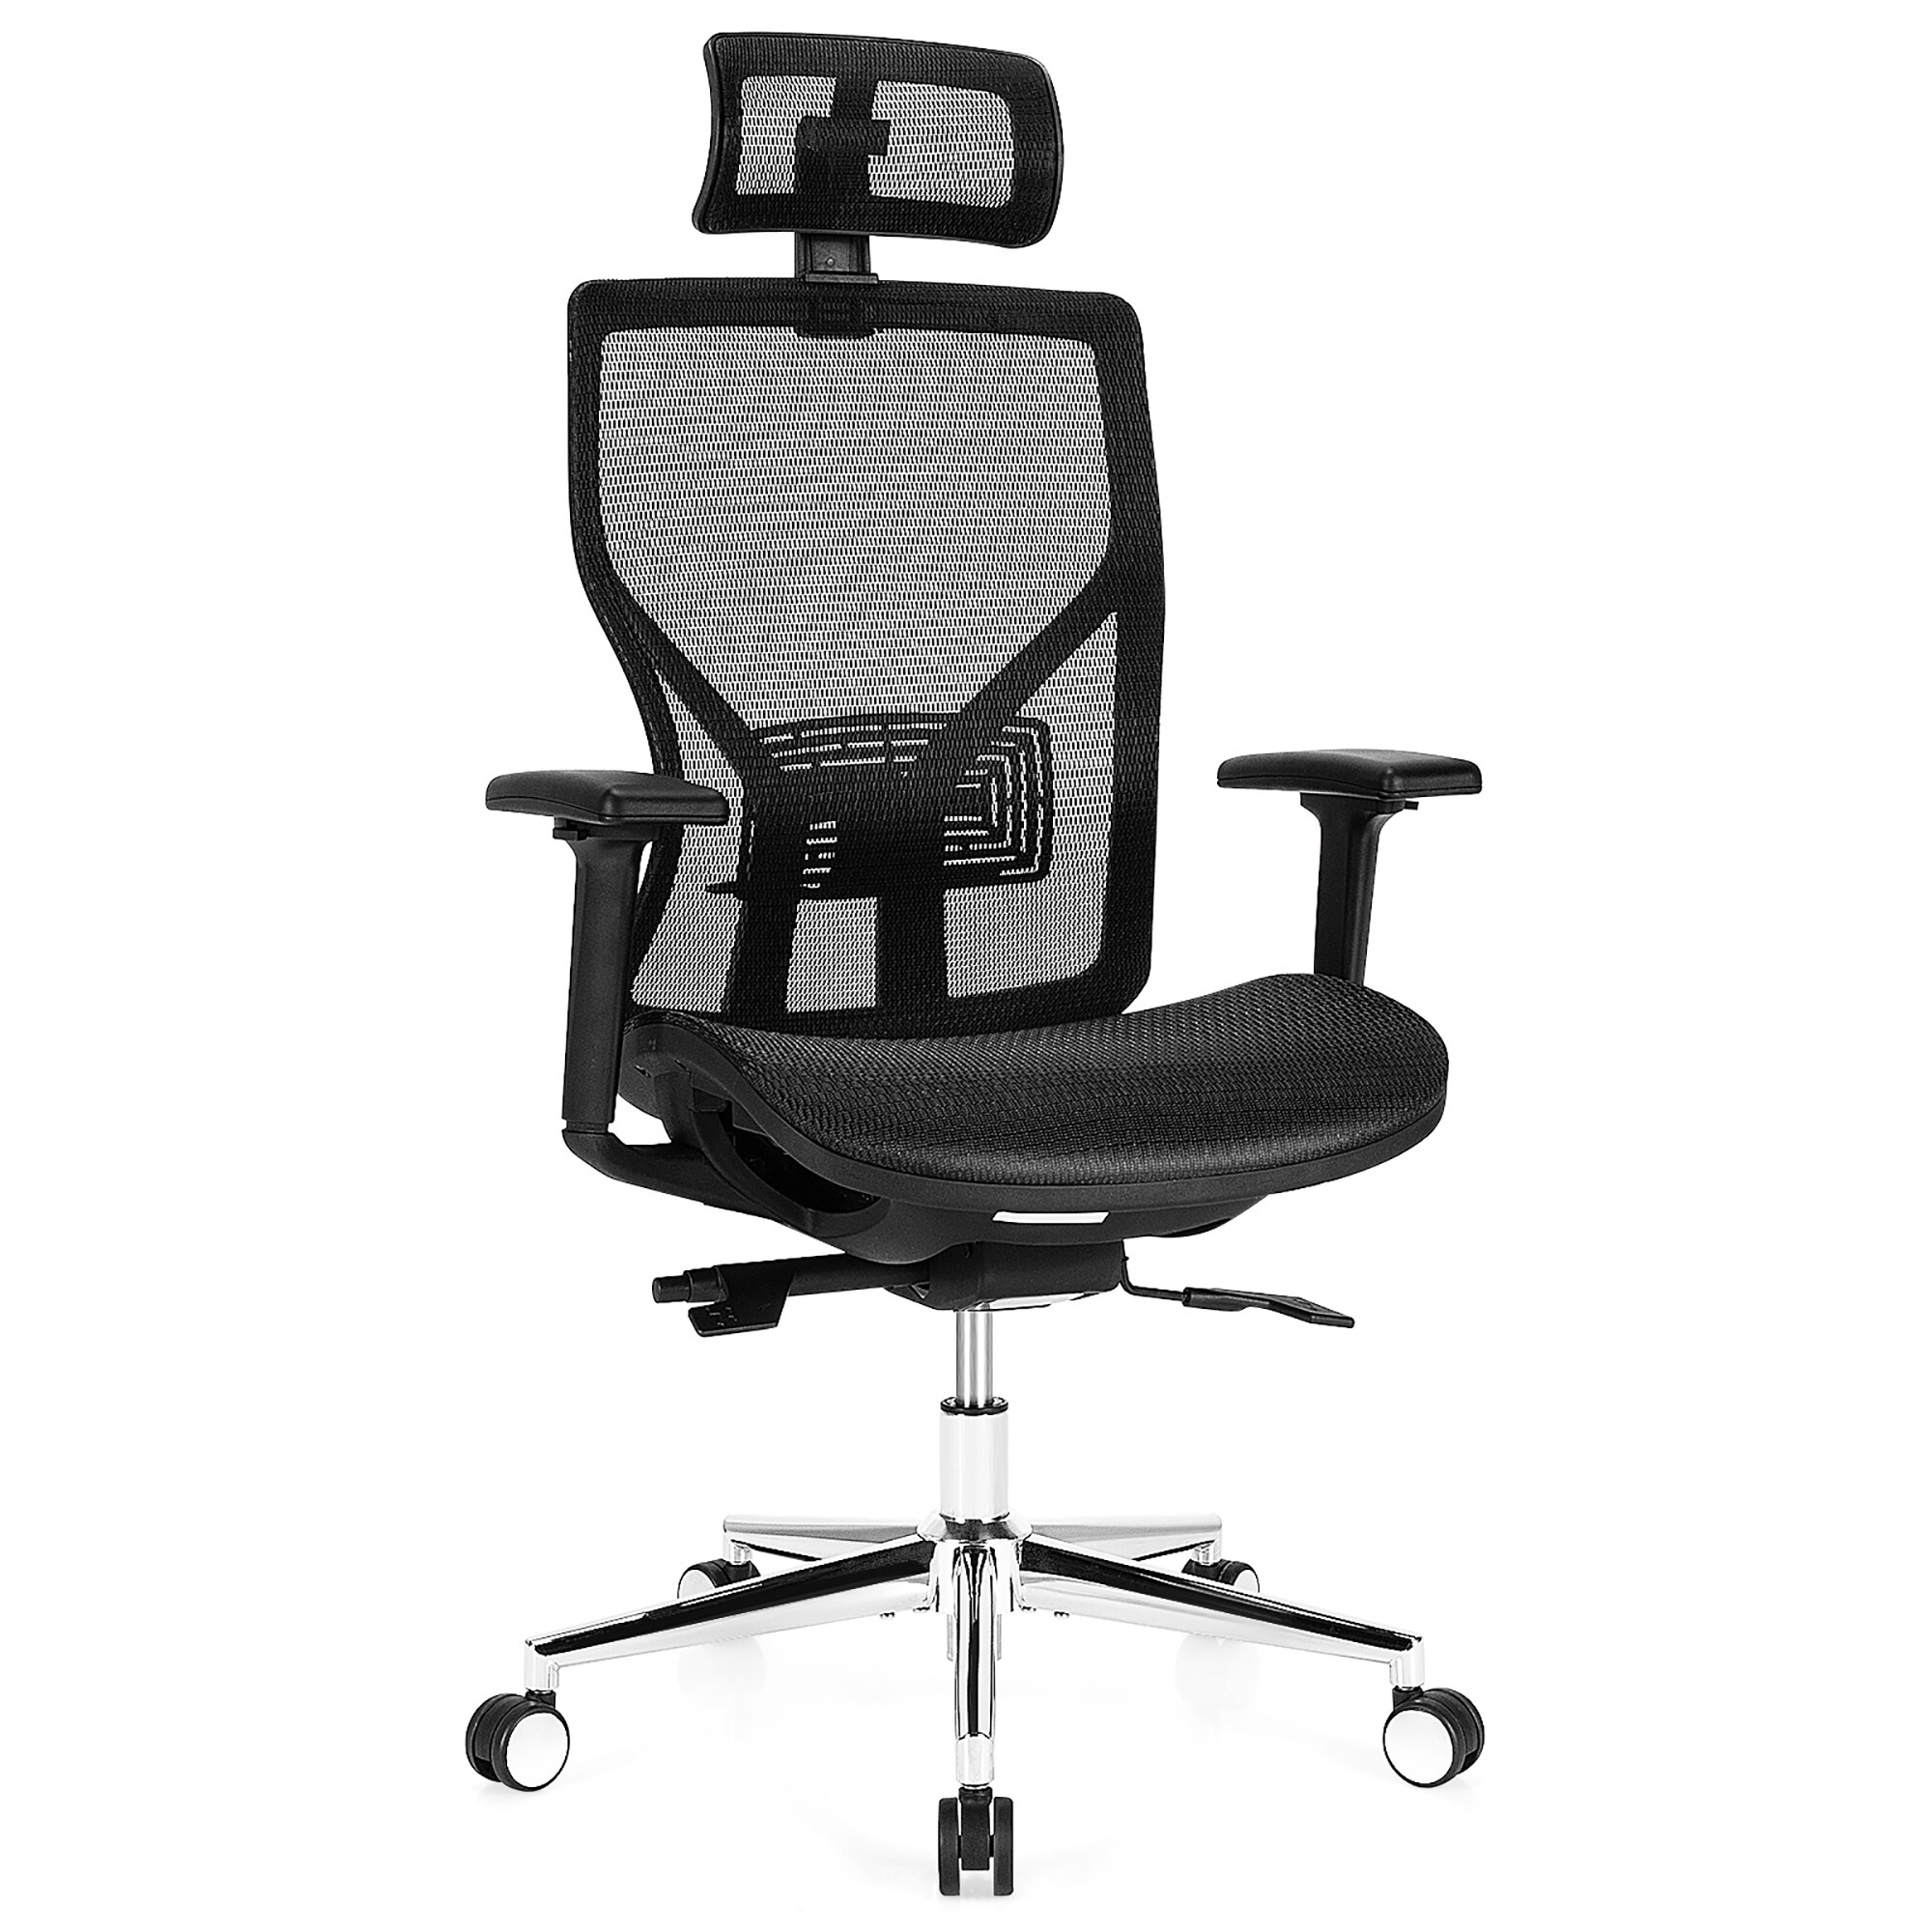 https://ak1.ostkcdn.com/images/products/is/images/direct/5ebc3efb346dd68f2c33c34b0a7cd3373e50e83c/Costway-Ergonomic-Office-Chair-High-Back-Mesh-Chair-w-Adjustable.jpg